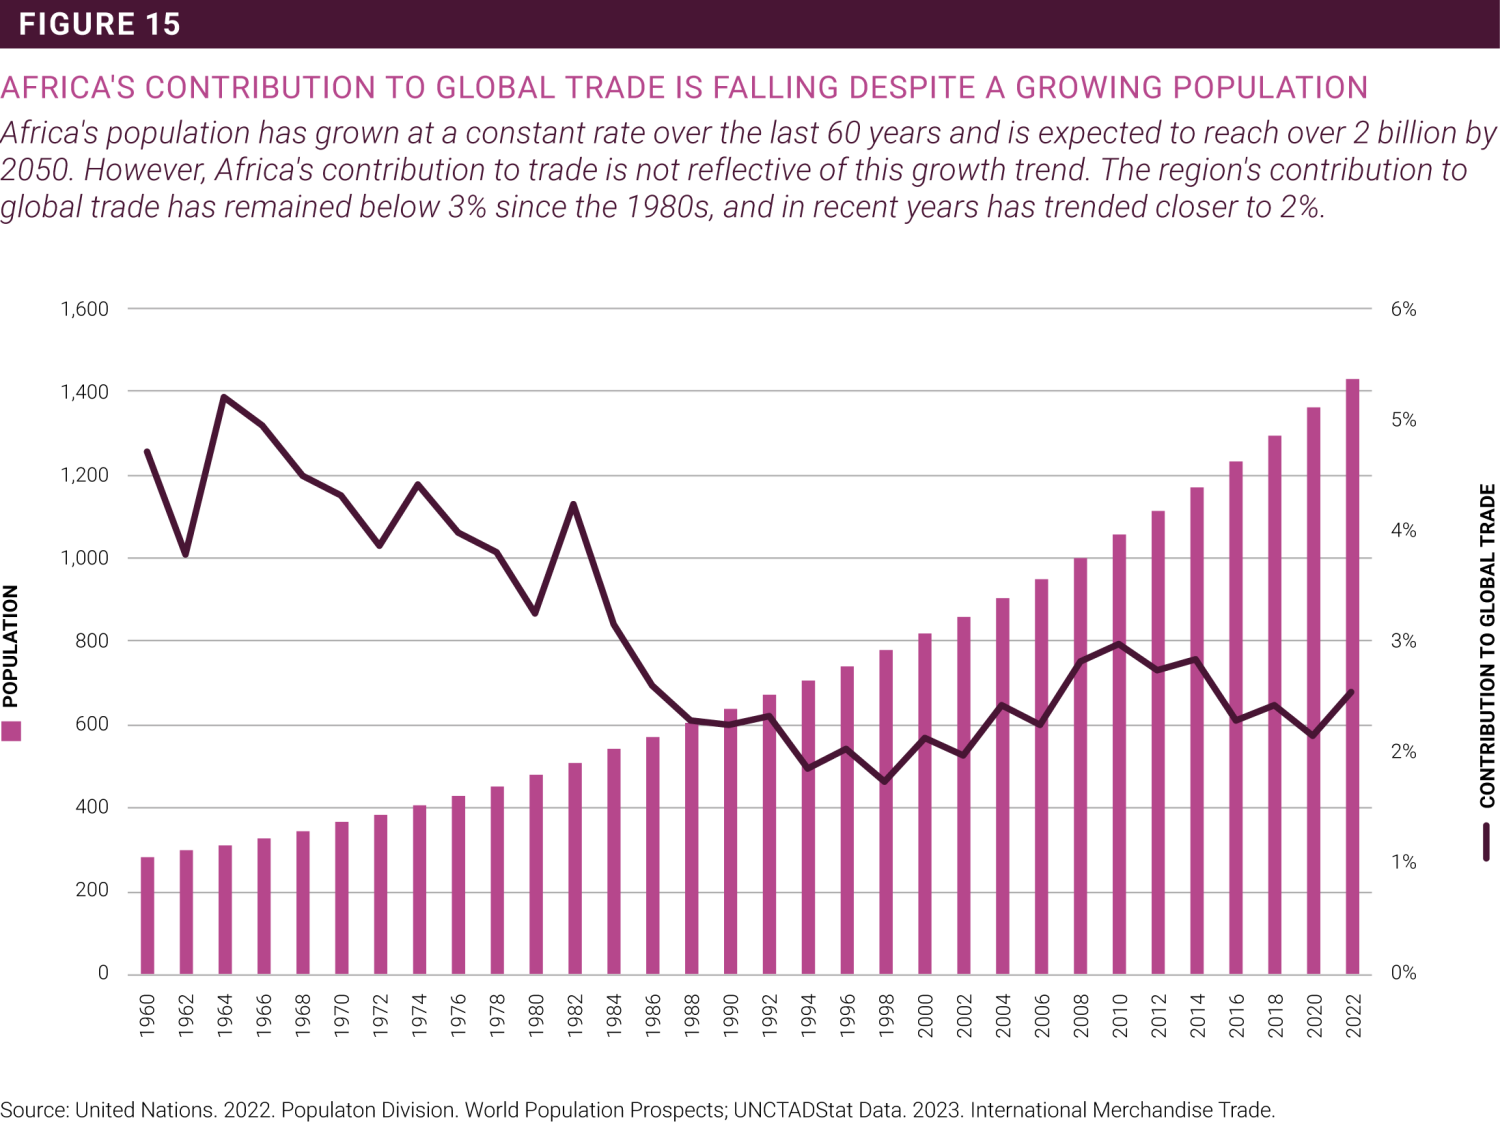 AFRICA'S CONTRIBUTION TO GLOBAL TRADE IS FALLING DESPITE A GROWING POPULATION